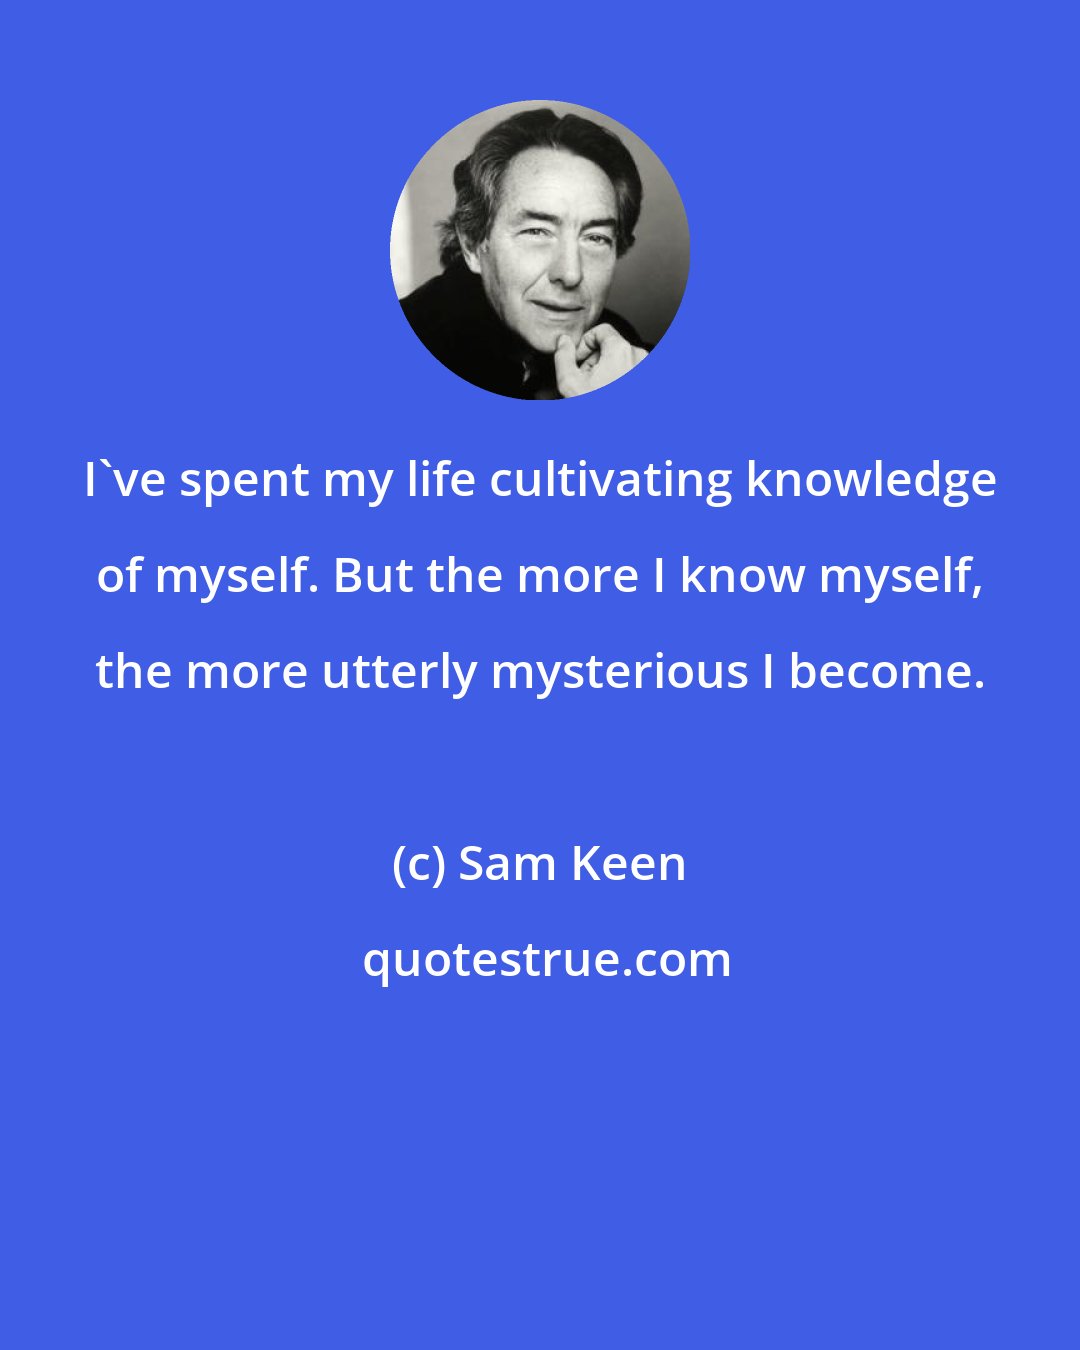 Sam Keen: I've spent my life cultivating knowledge of myself. But the more I know myself, the more utterly mysterious I become.